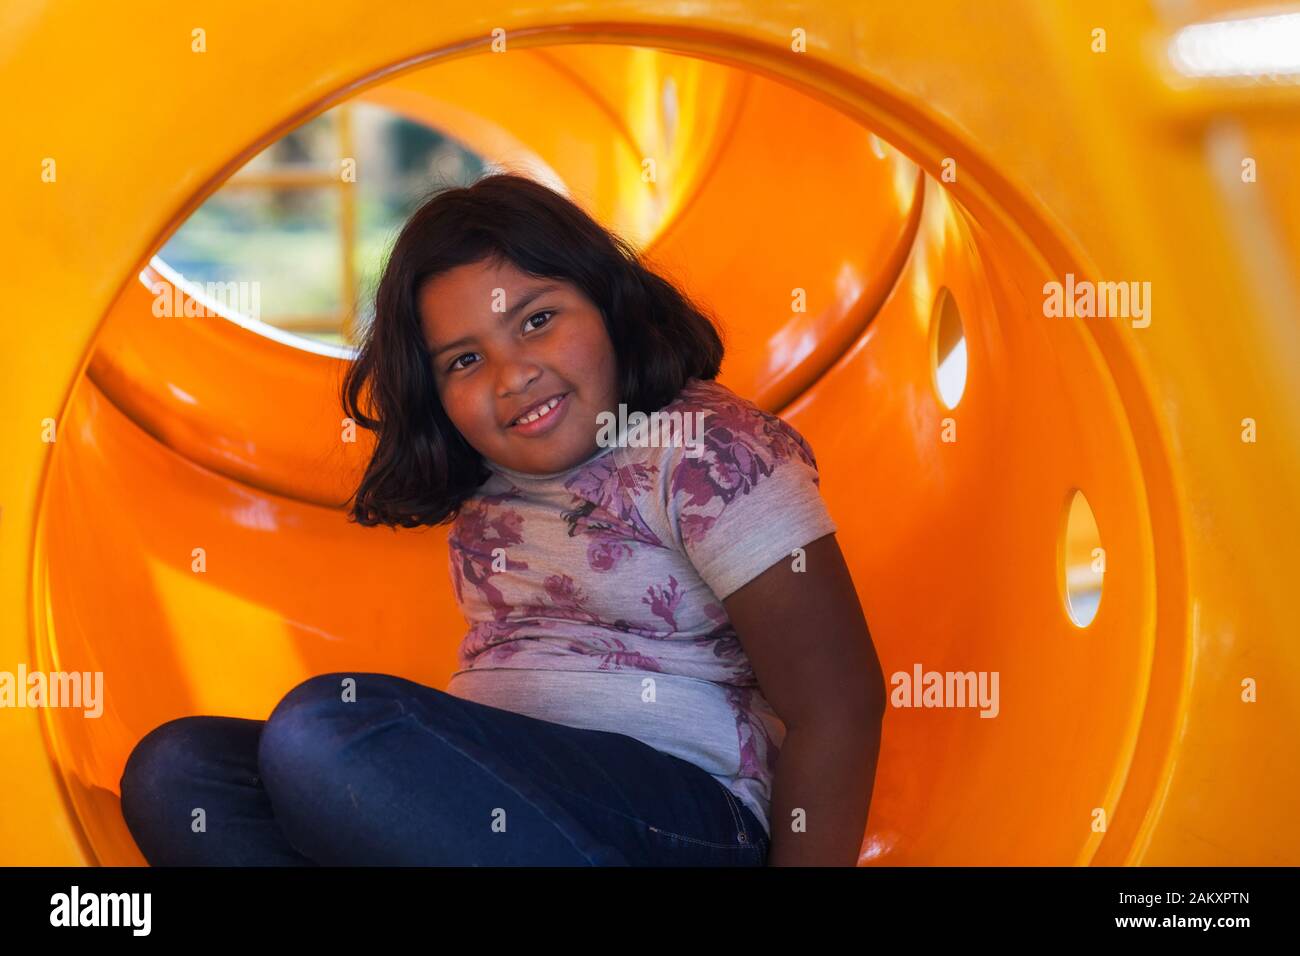 A cute latino girl with short hair playing in a kids playground, sitting  inside a circular tube slide Stock Photo - Alamy